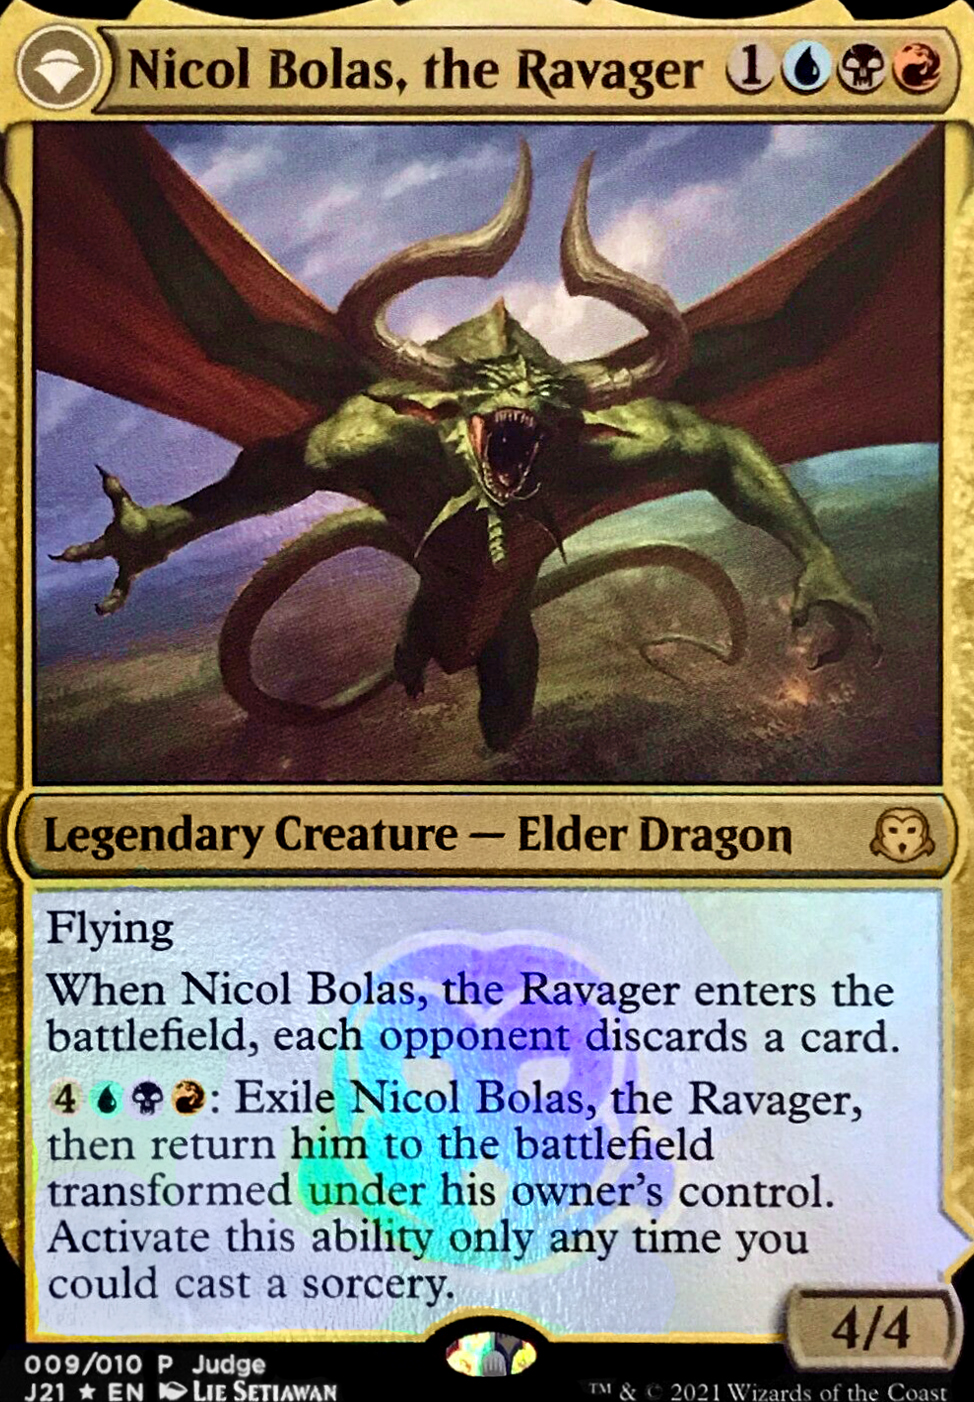 Nicol Bolas, the Ravager feature for Army of Bolas